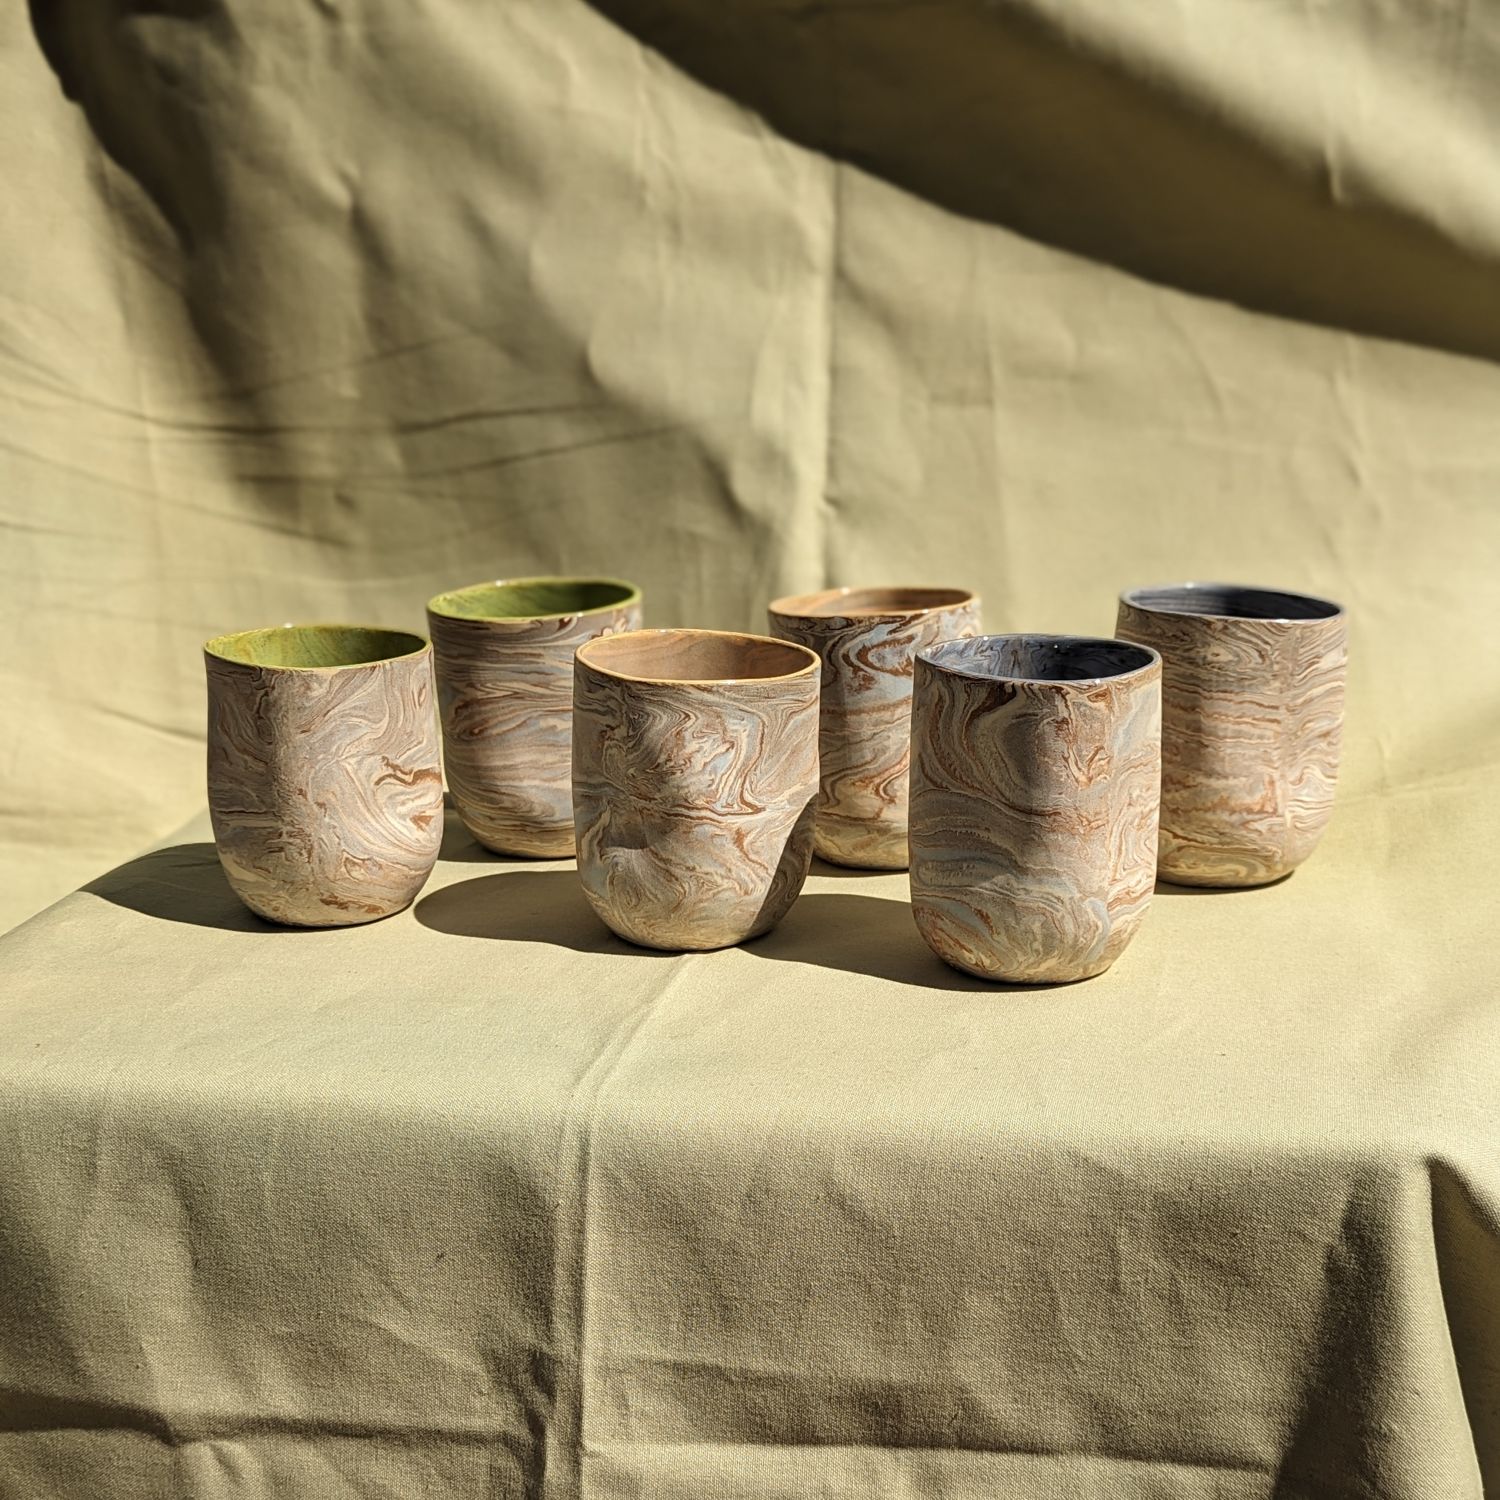 Wendy Nichol: Blue-Grey Tumbler with Green Interior Glaze (Each sold separately) Product Image 1 of 1